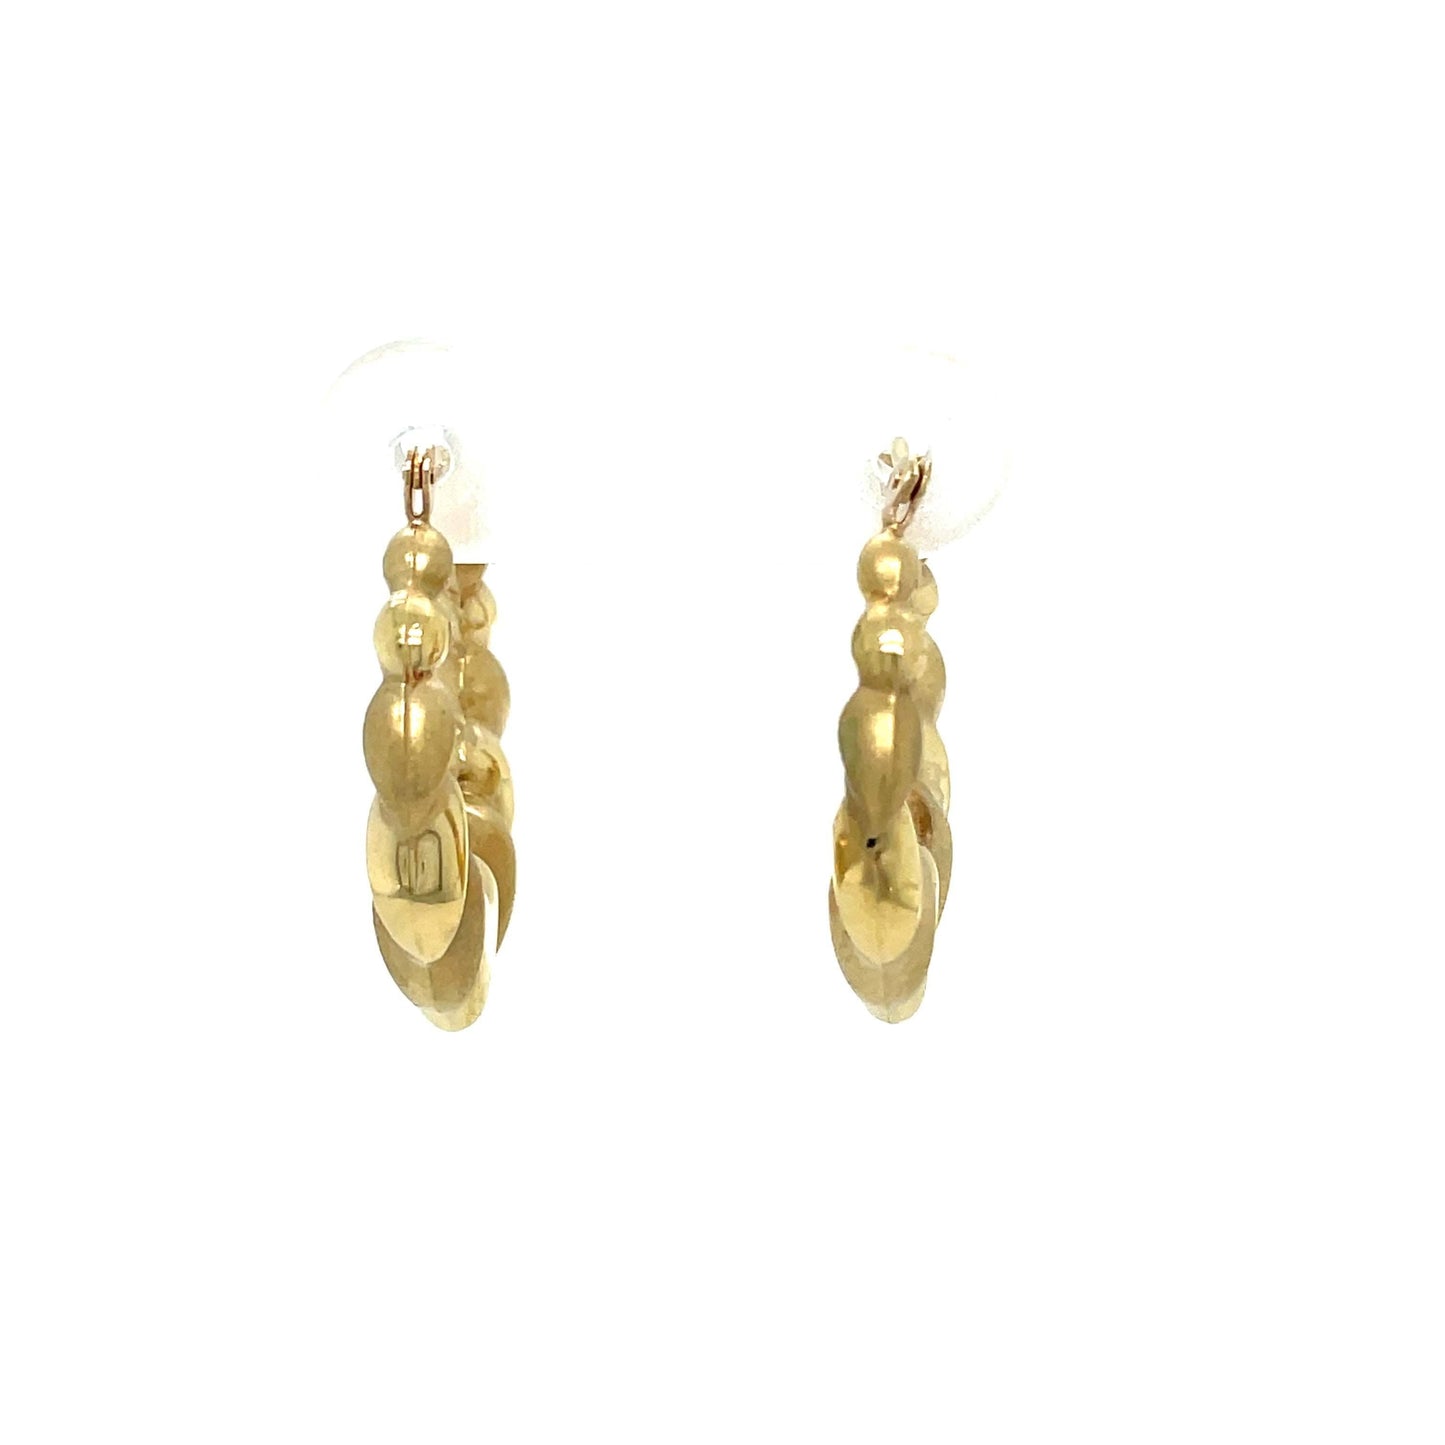 Load image into Gallery viewer, Estate Claddagh Hoop Earrings in 14K Yellow Gold
